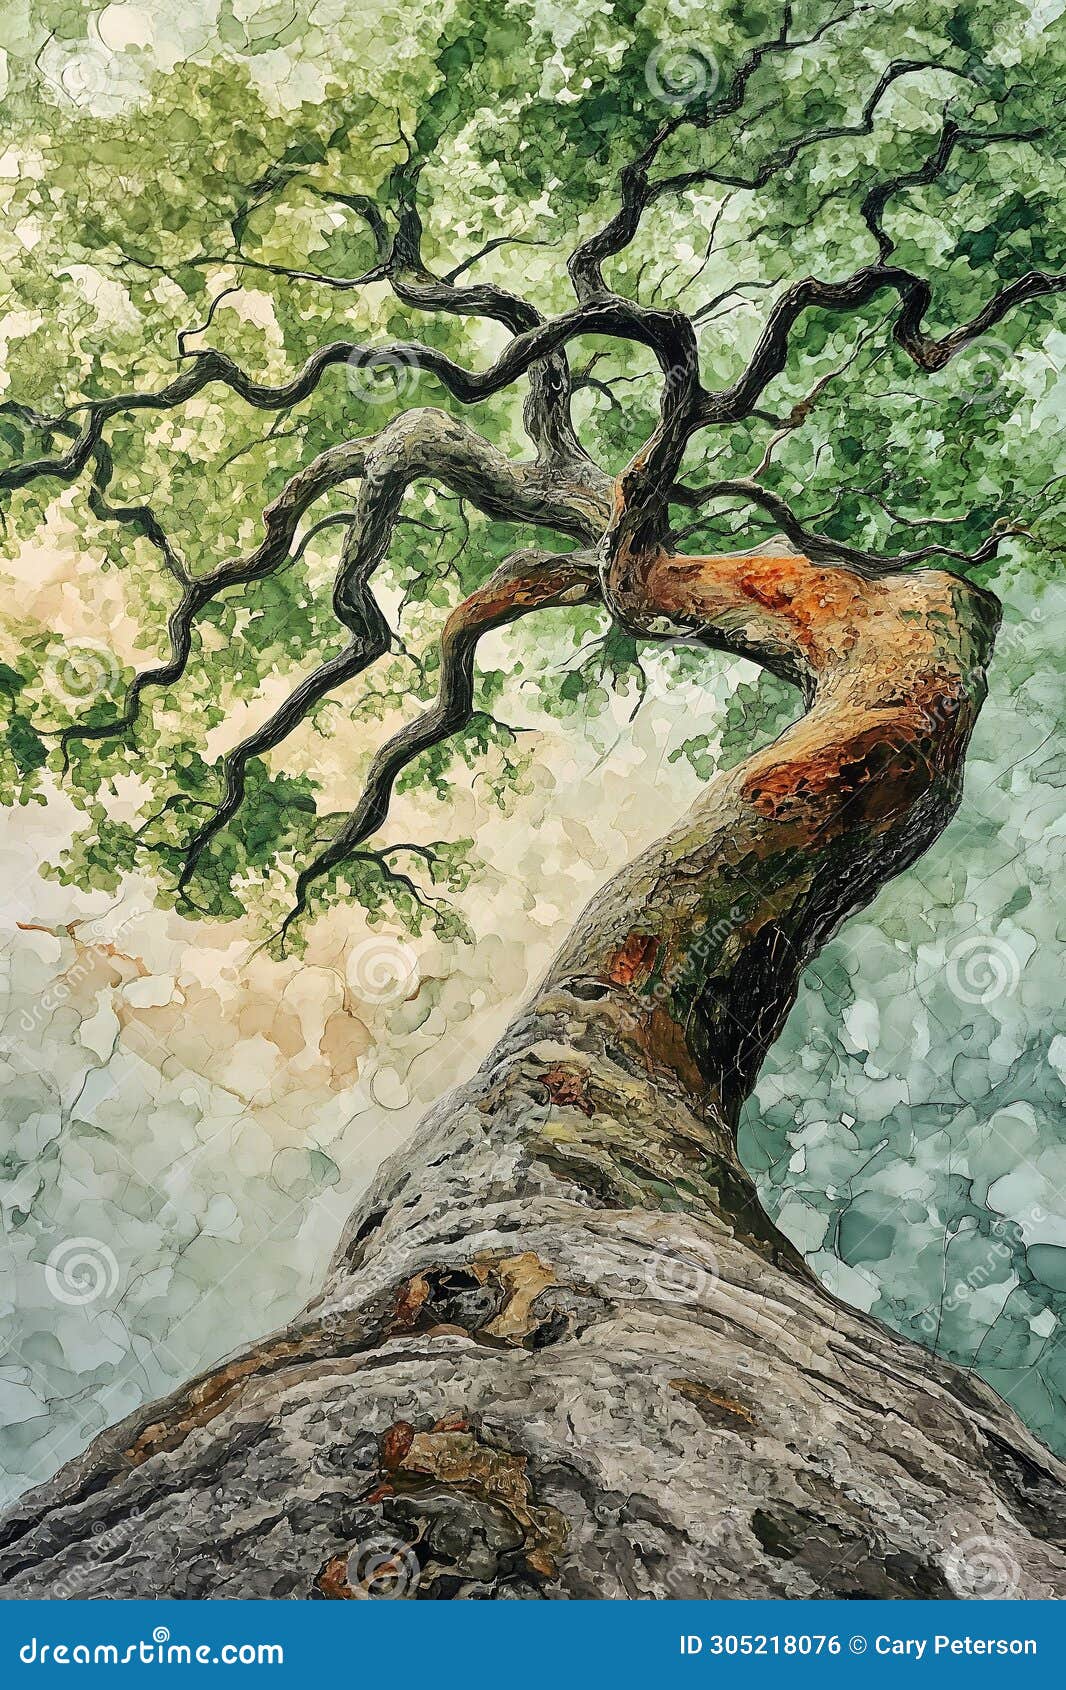 spiraling shades: a whimsical oak tree ink wash on a vibrant yel